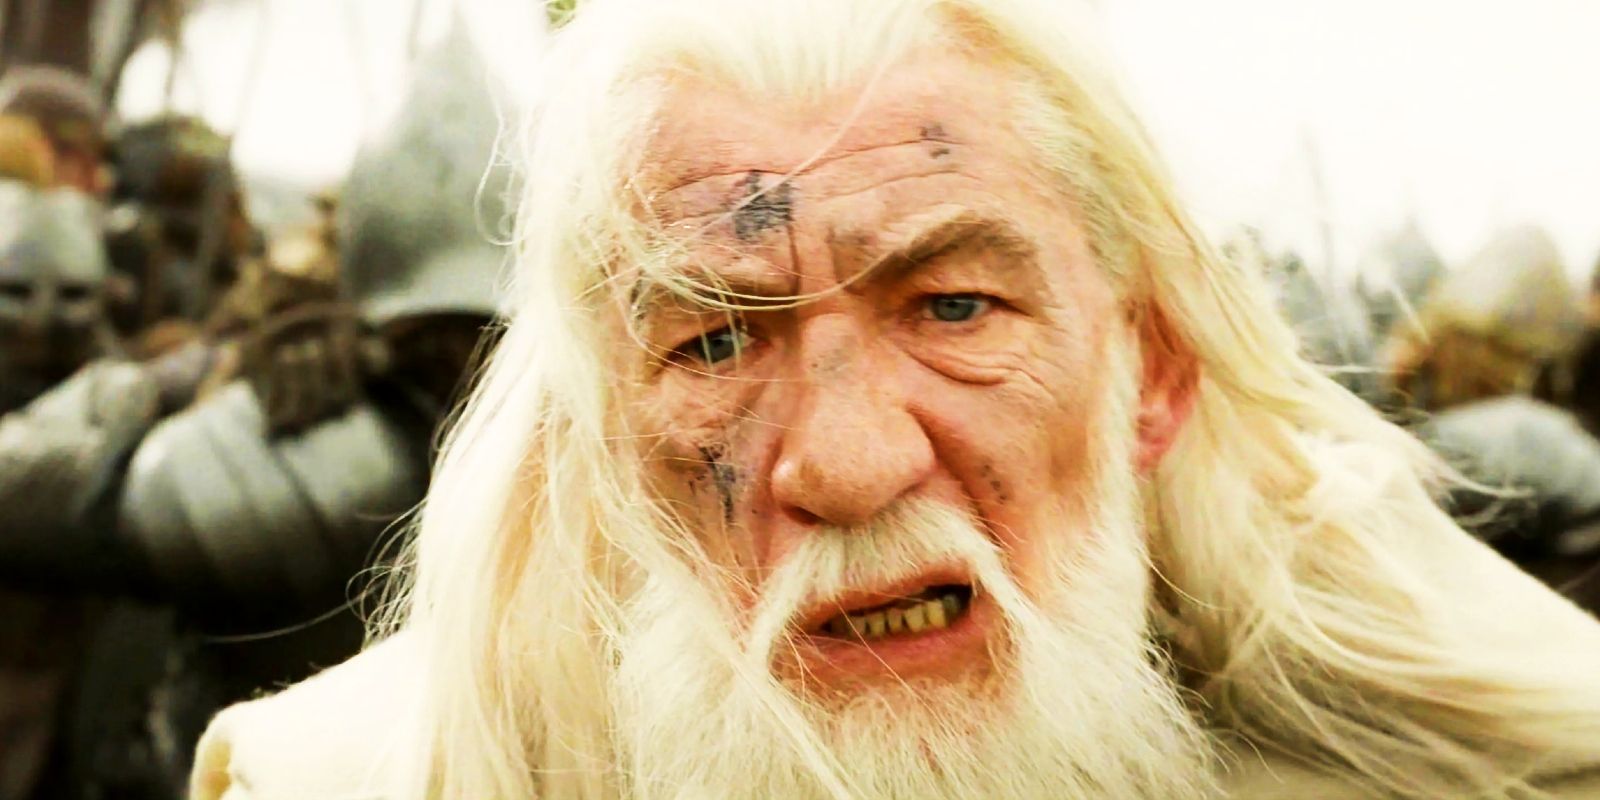 Ian McKellen as Gandalf in the heat of battle in Lord of the Rings The Return of the King